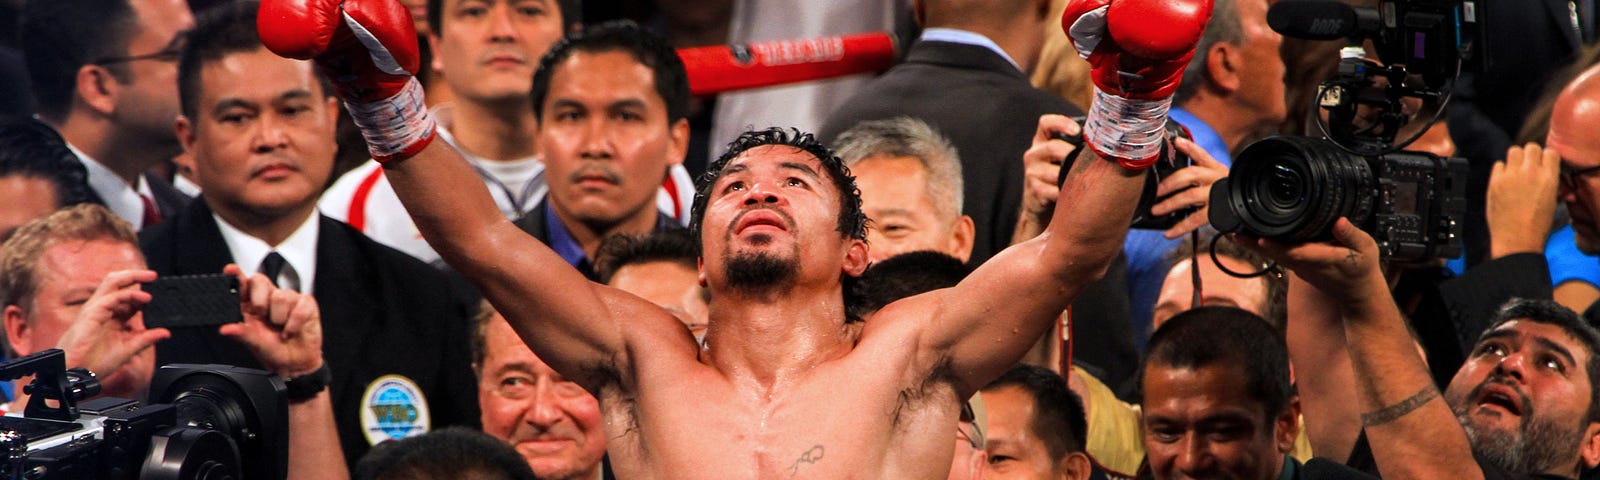 A boxer celebrating after winning the fight between people and media